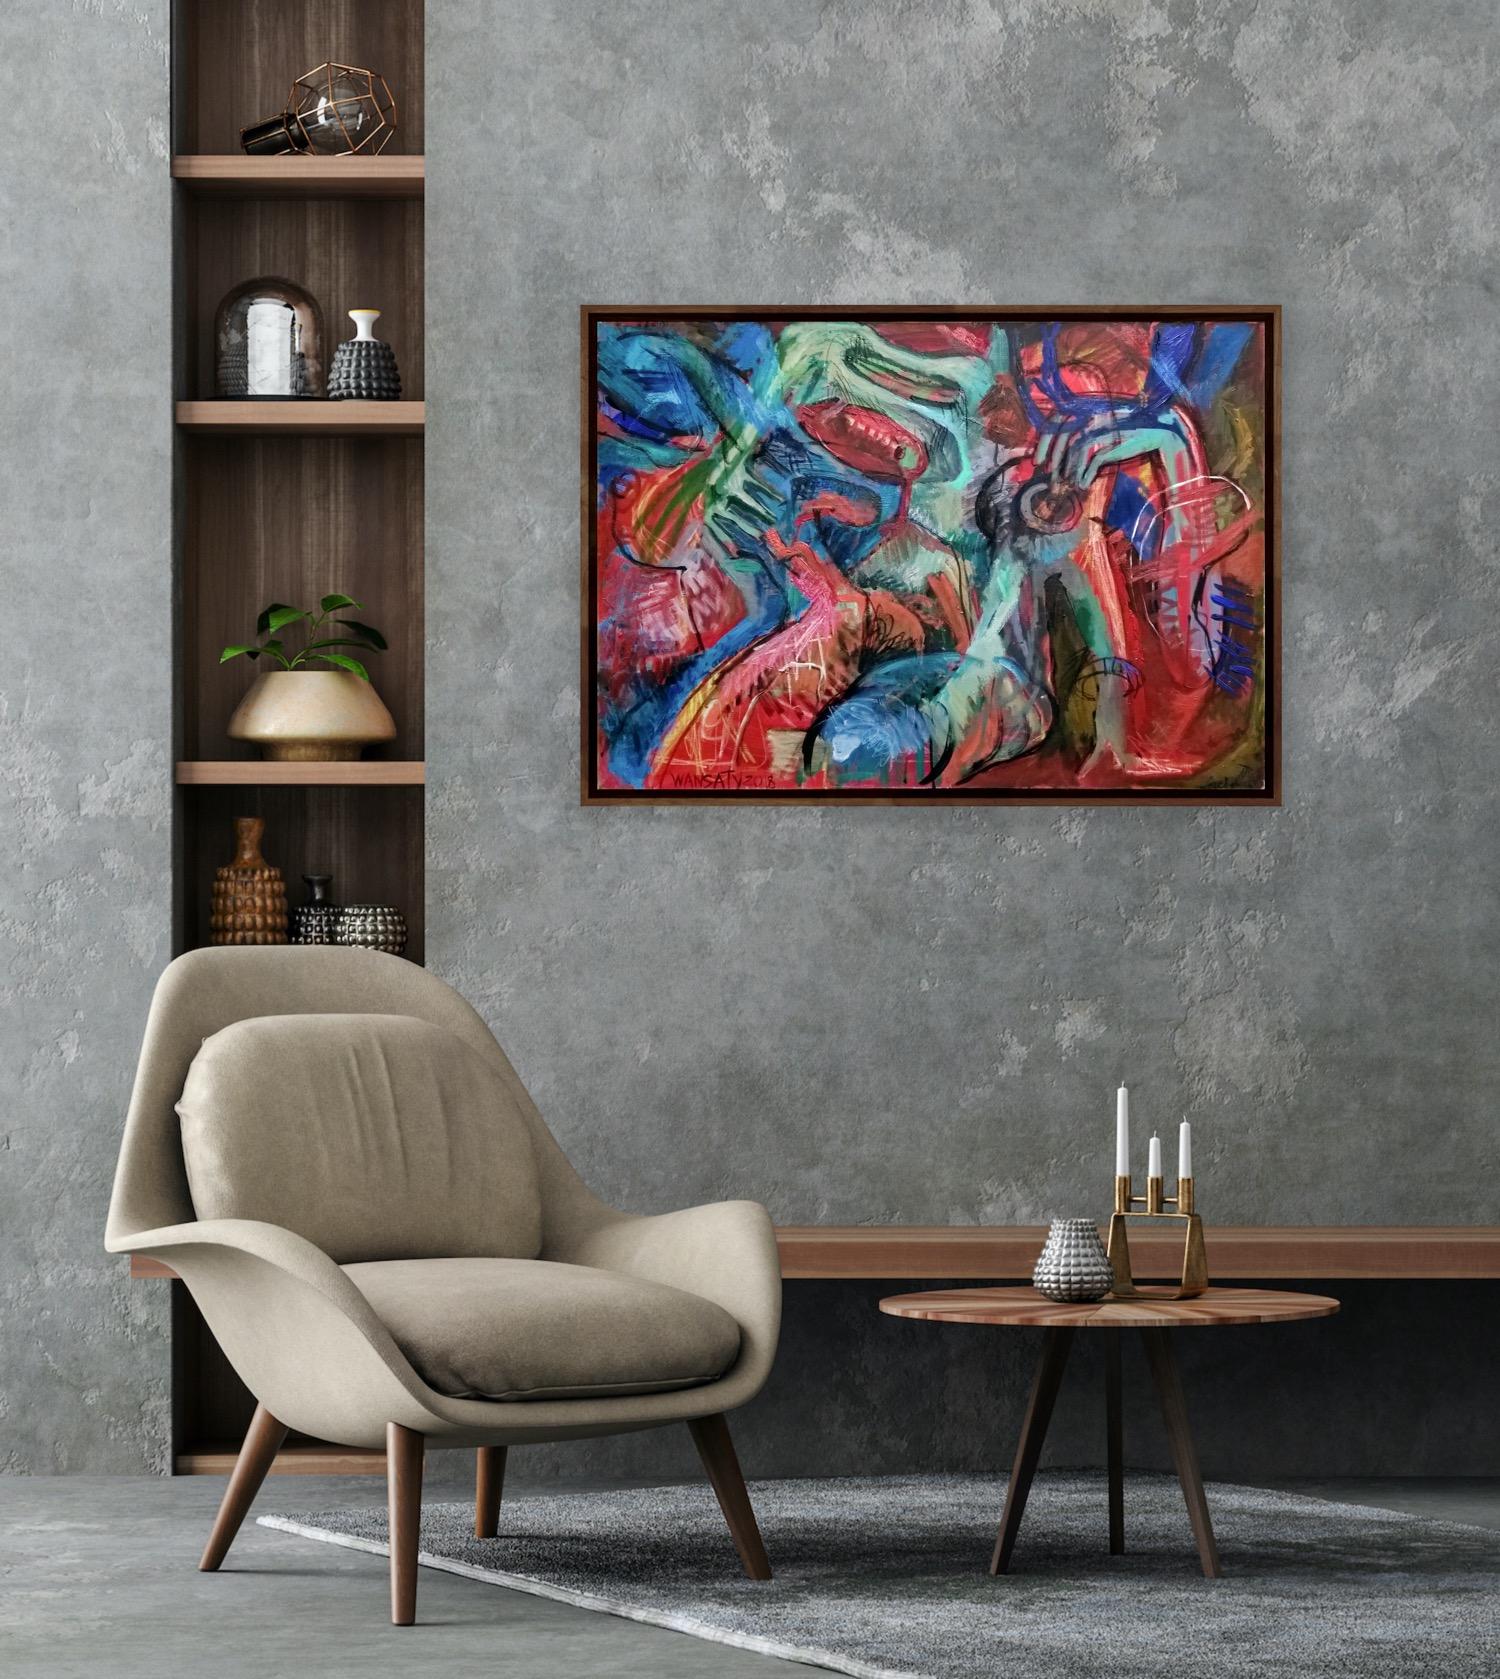 Immersion, 70x100cm - Gray Abstract Painting by Tatiana Levchenko